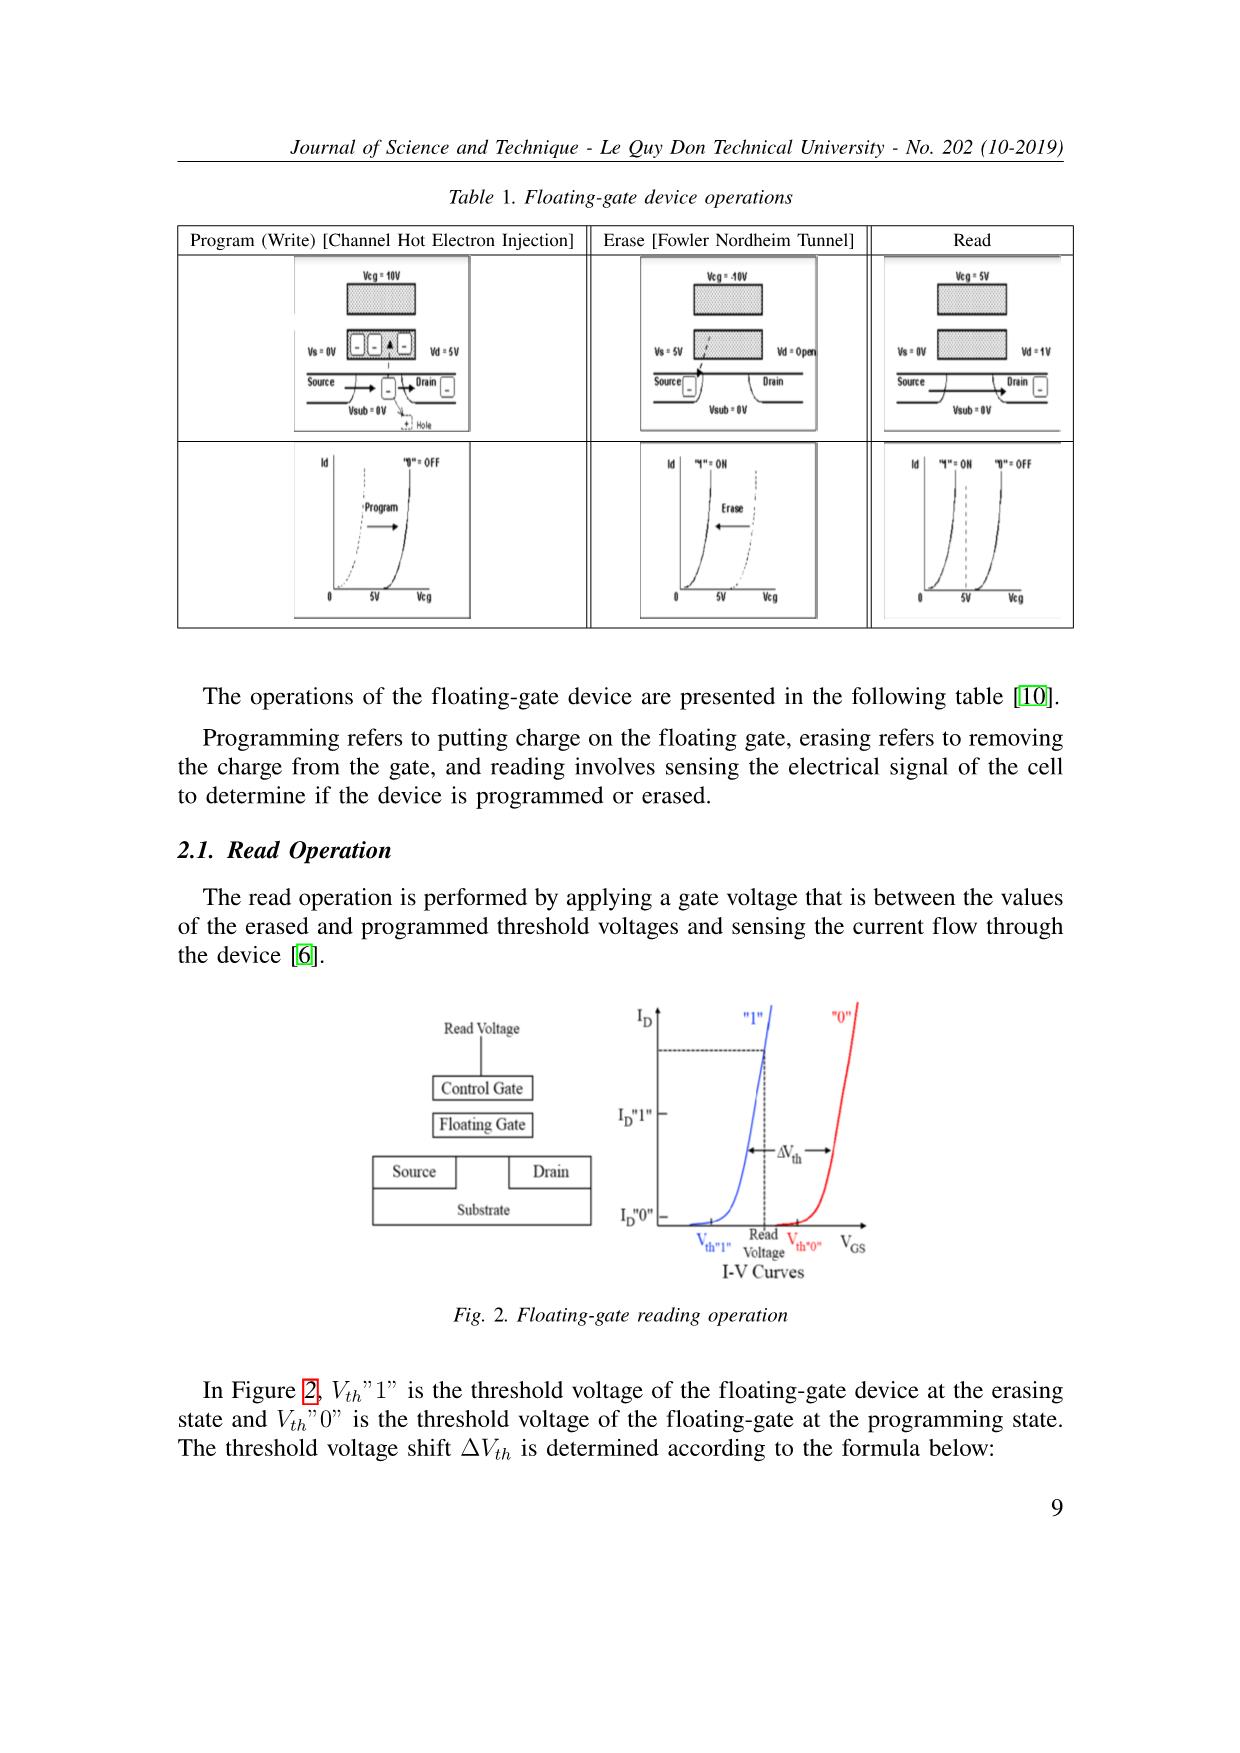 Applications of tcad simulation software to the study of floating - gate device trang 3